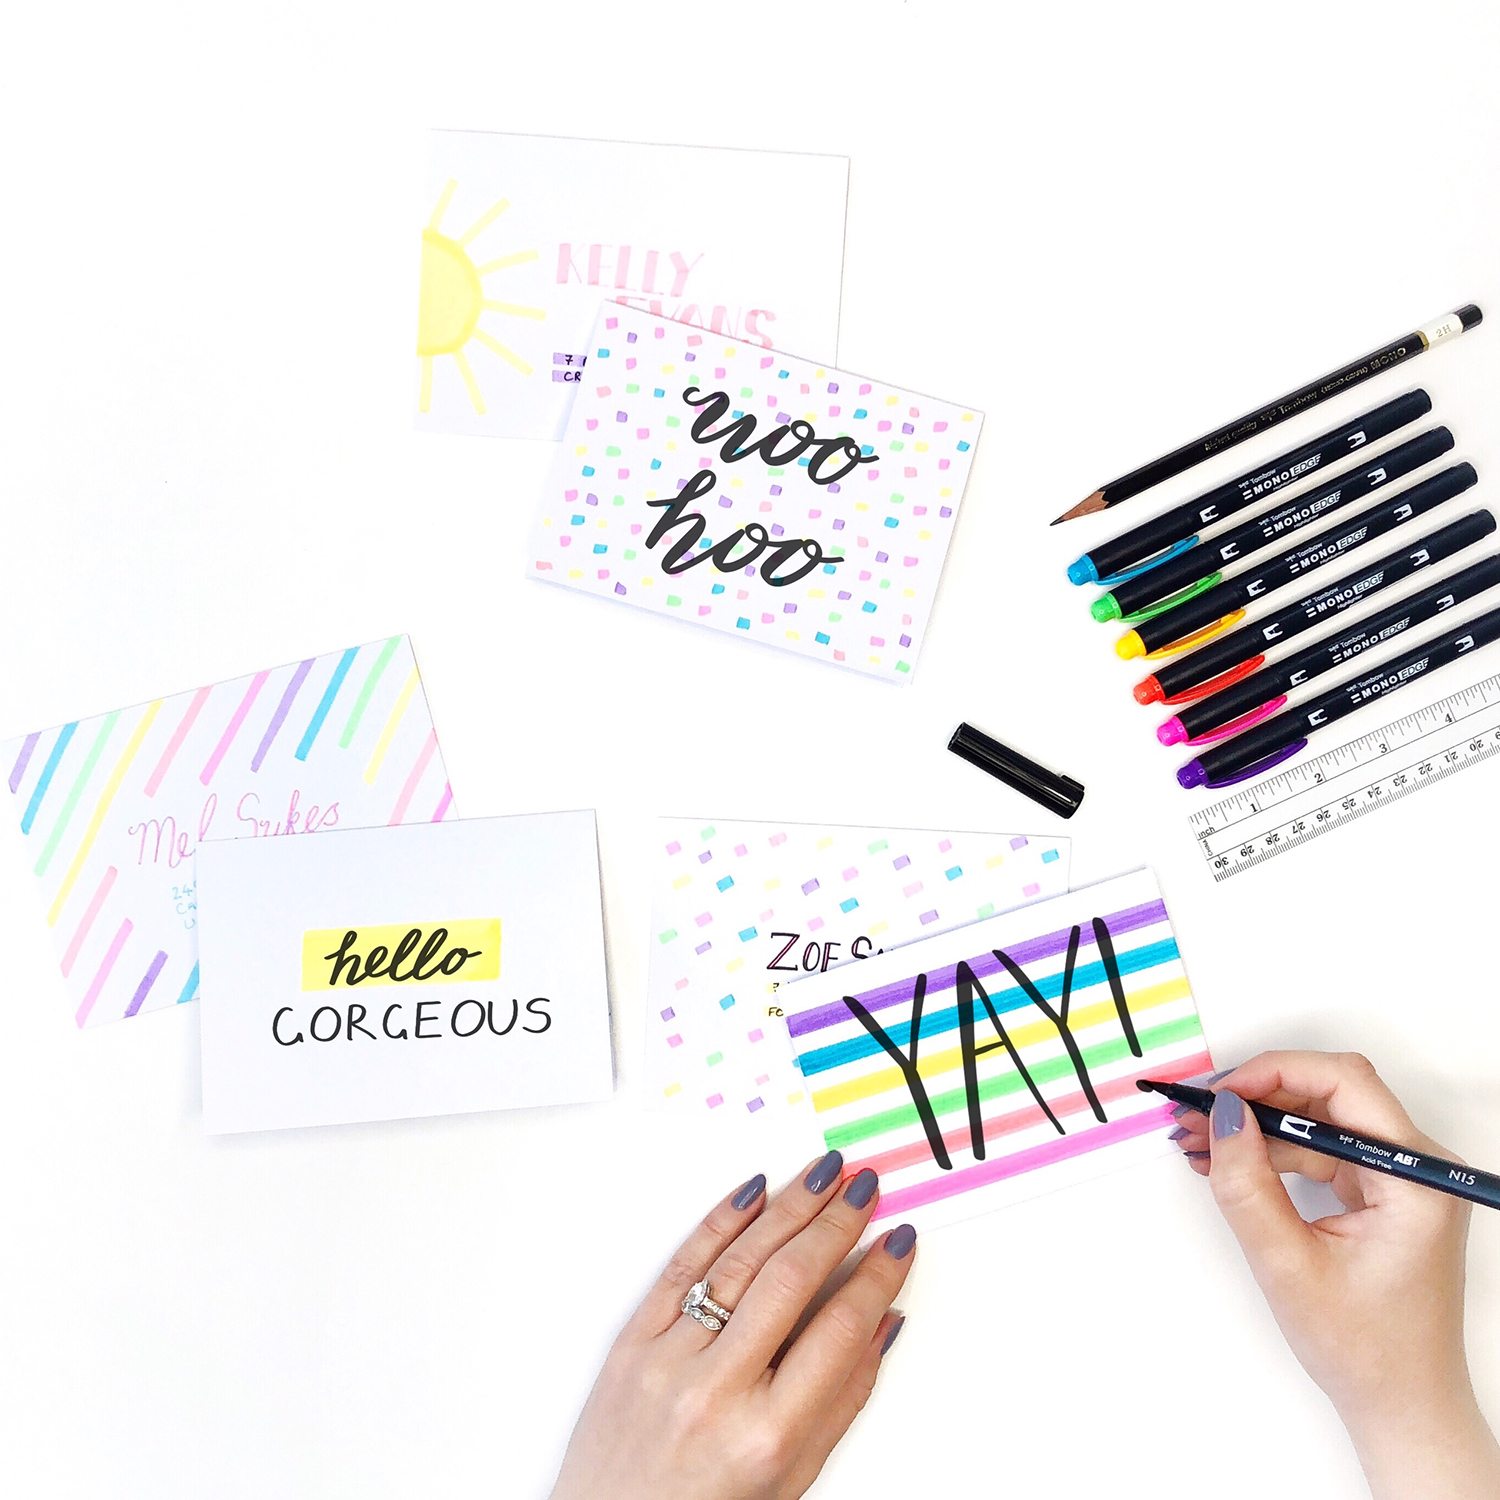 Create bright summer mail art with Tombow MONO Edge Highlighters by Jessica Mack